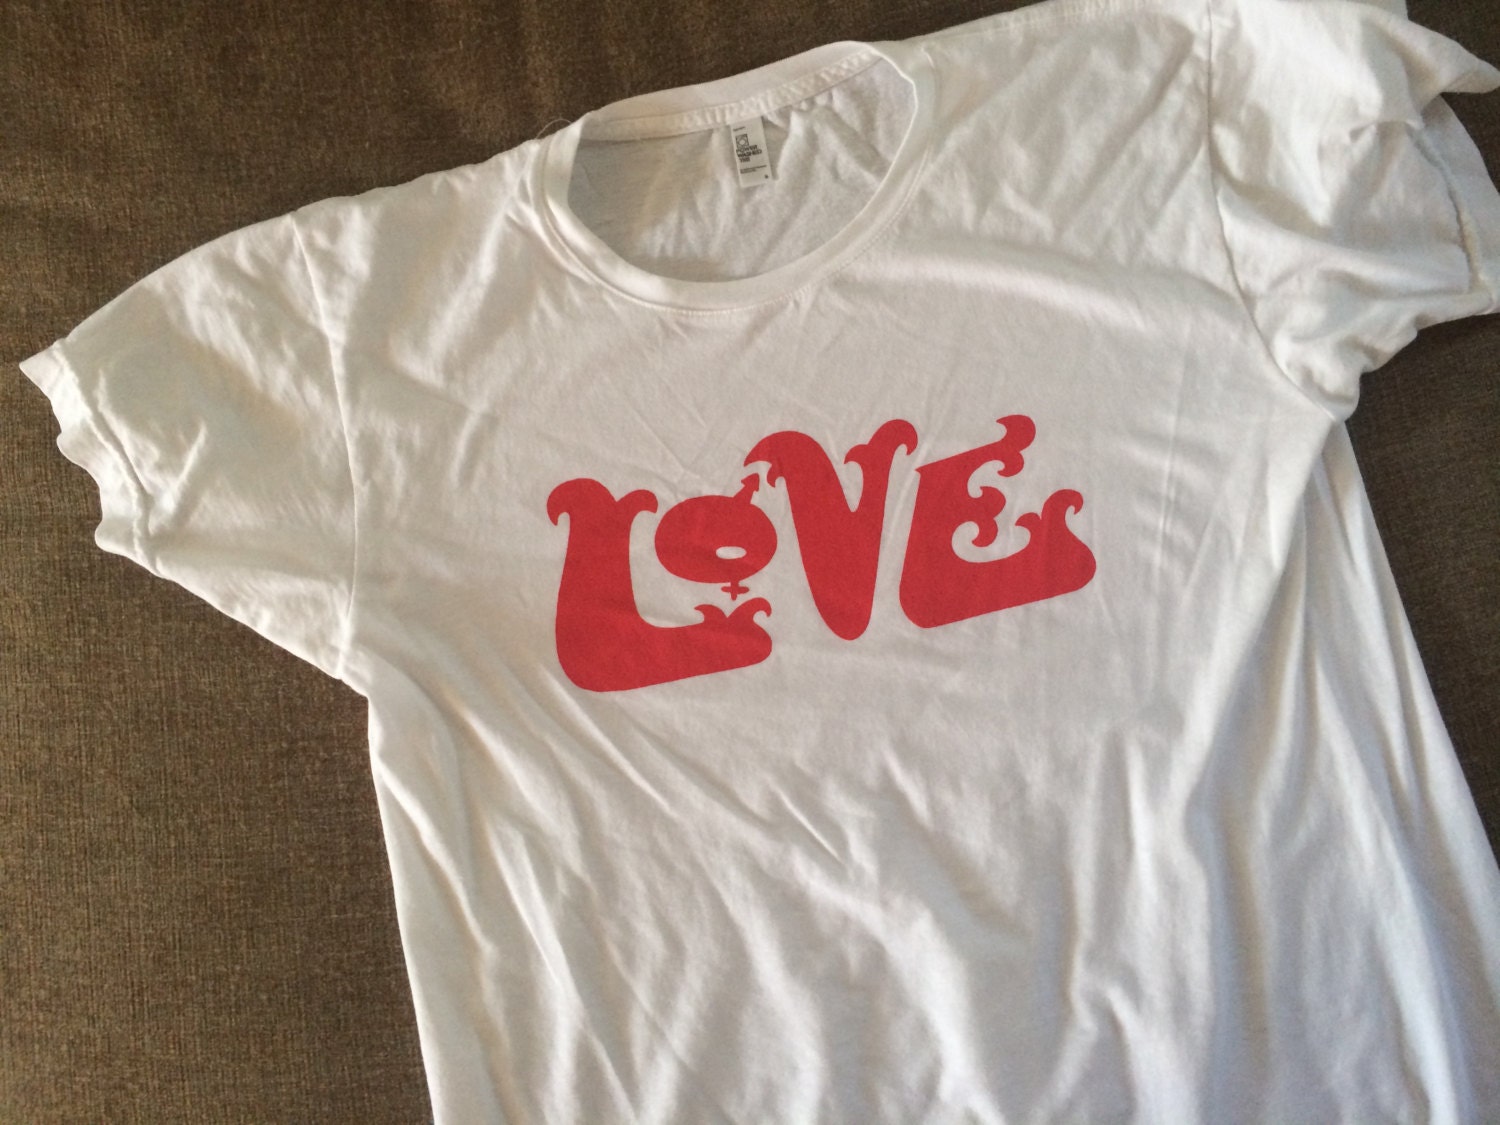 Love Arthur Lee Psychedelic Band 1960's Logo Shirt by Numanoid1979